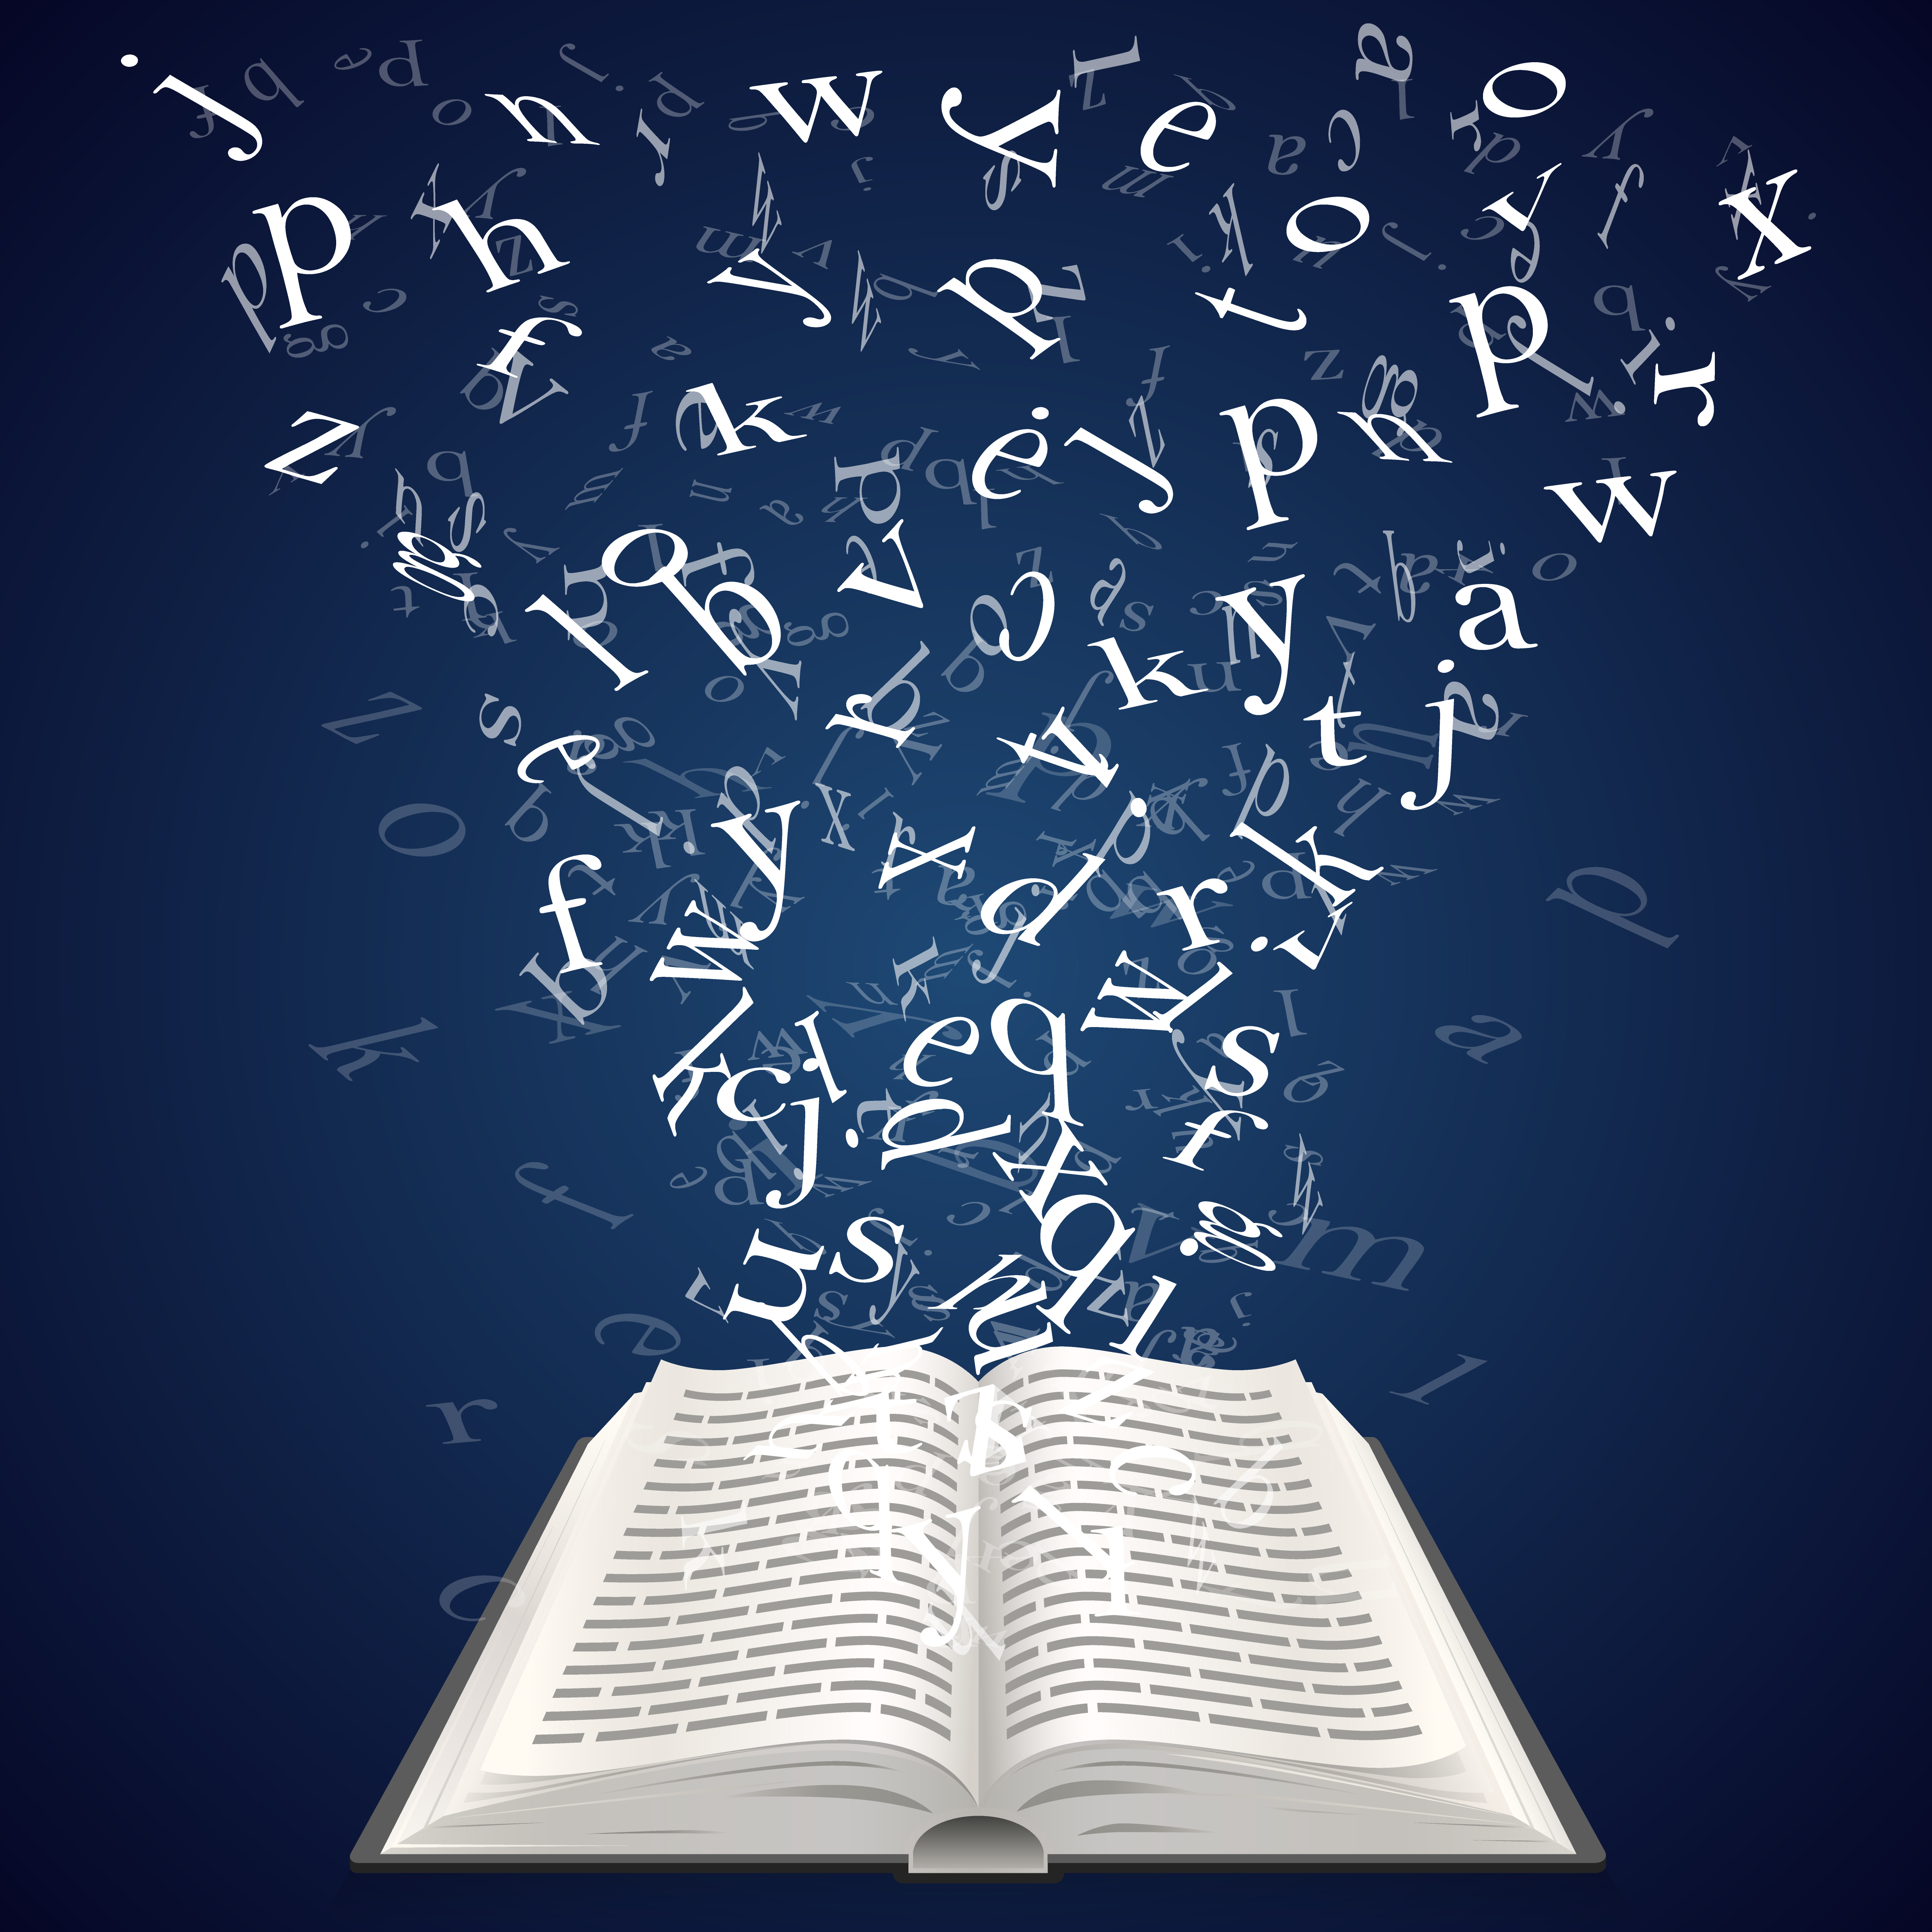 Image of an Open book with letters flying out of it